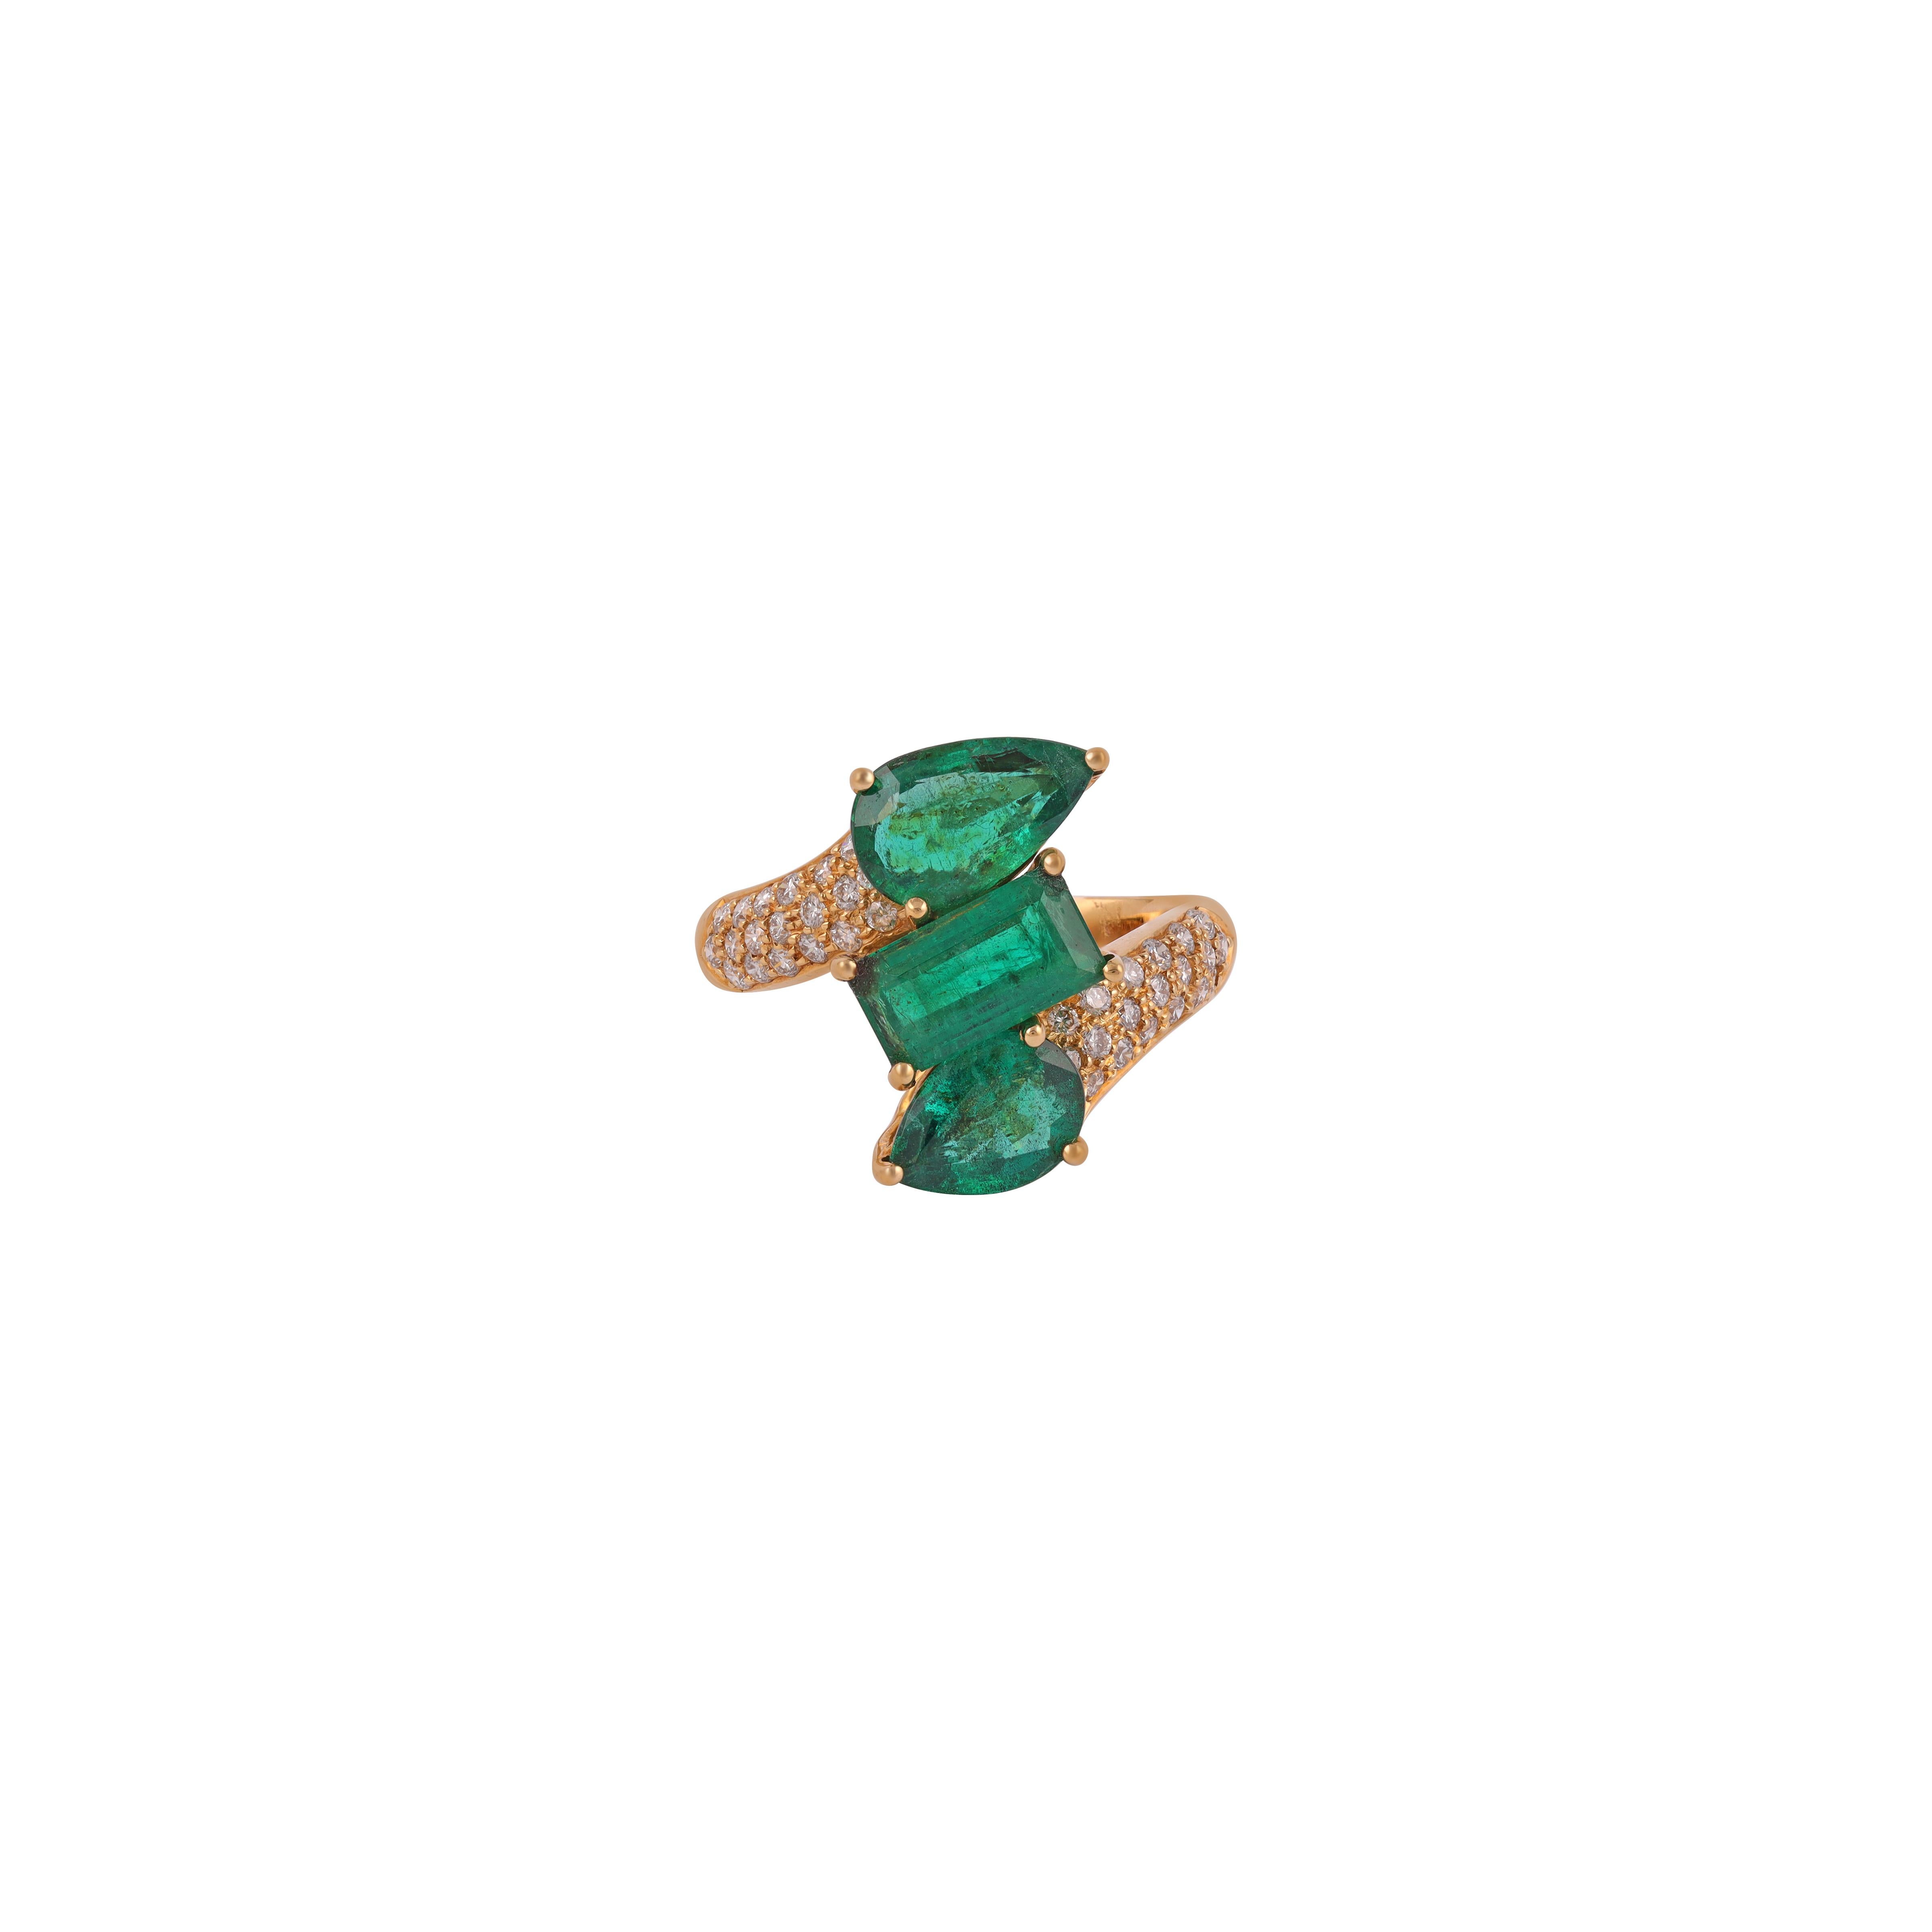 Set in 18 karat  gold, weighing 5.36 grams, The  Emerald is 3.42 carats & Diamond is 0.46 Carat 
 Ring size is 7
